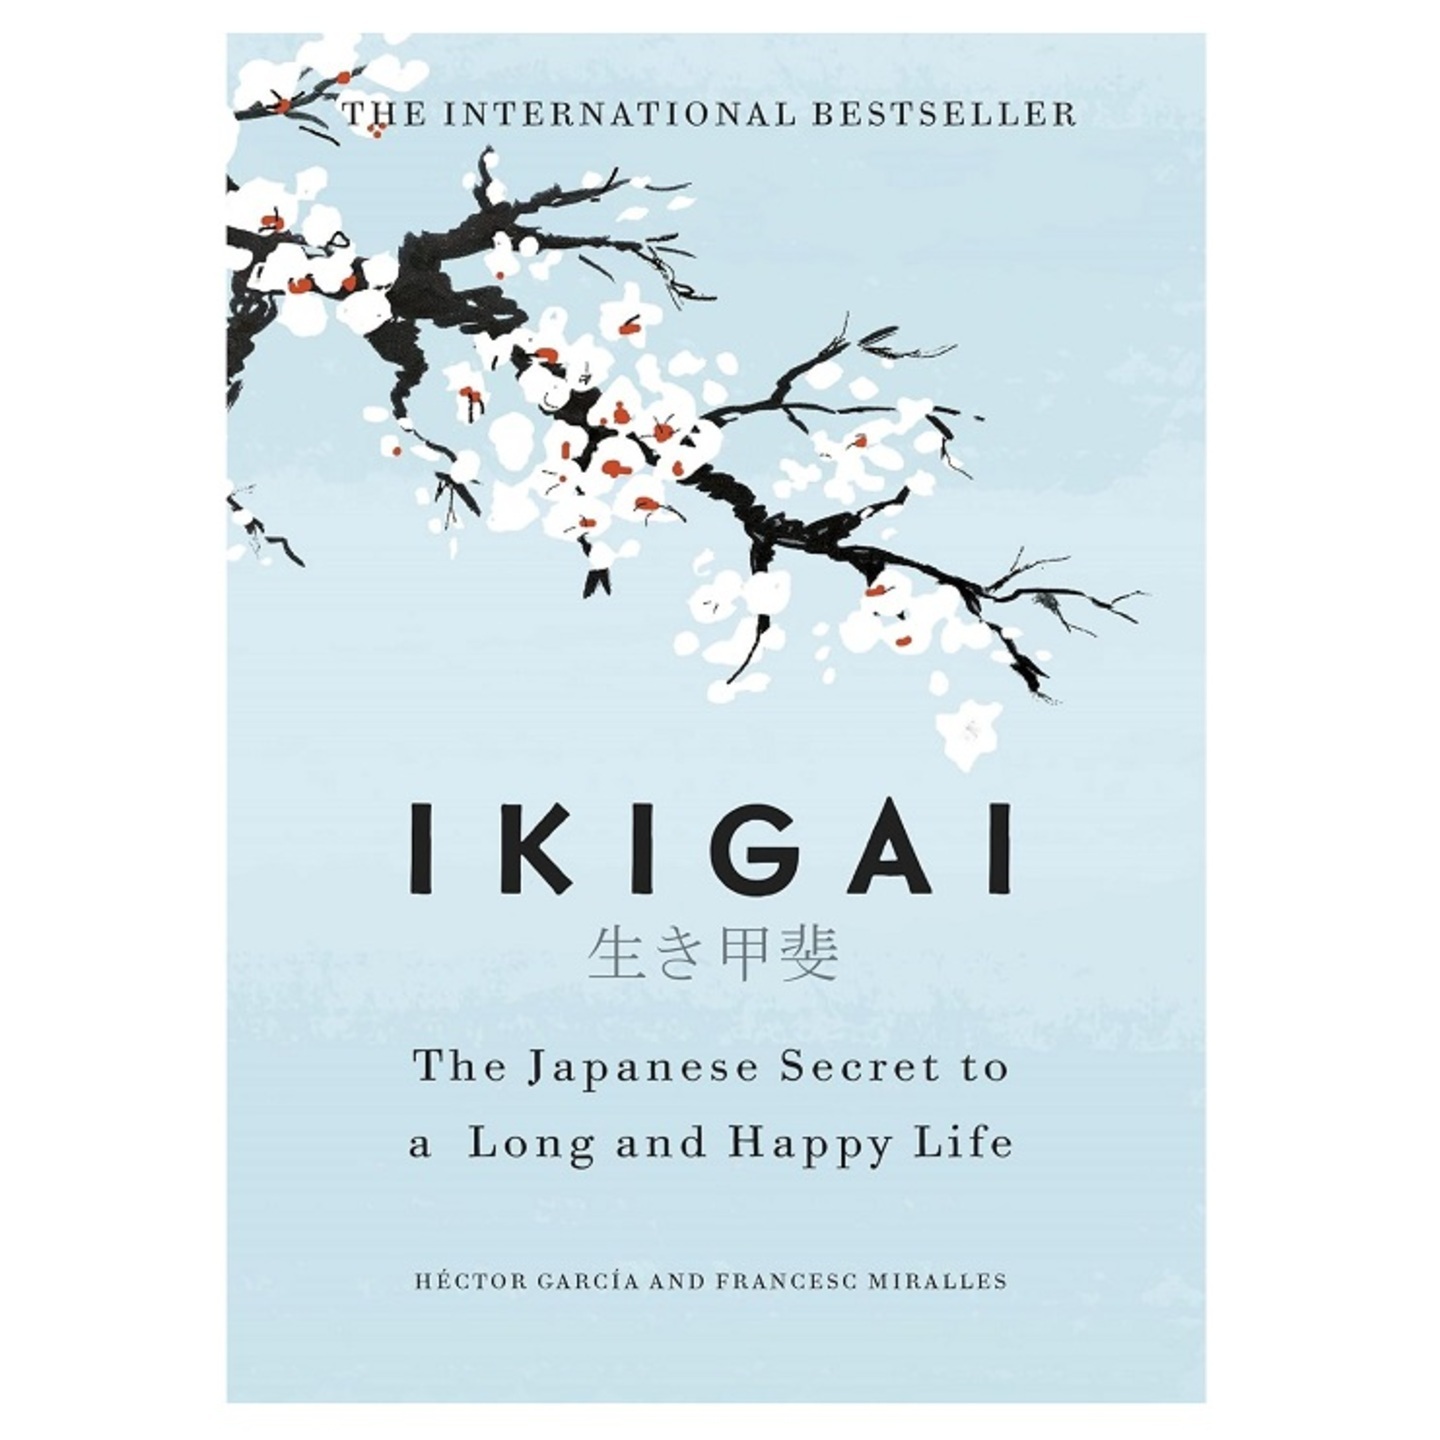 Book Ikigai - The Japanese Secret to a Long and Happy Life